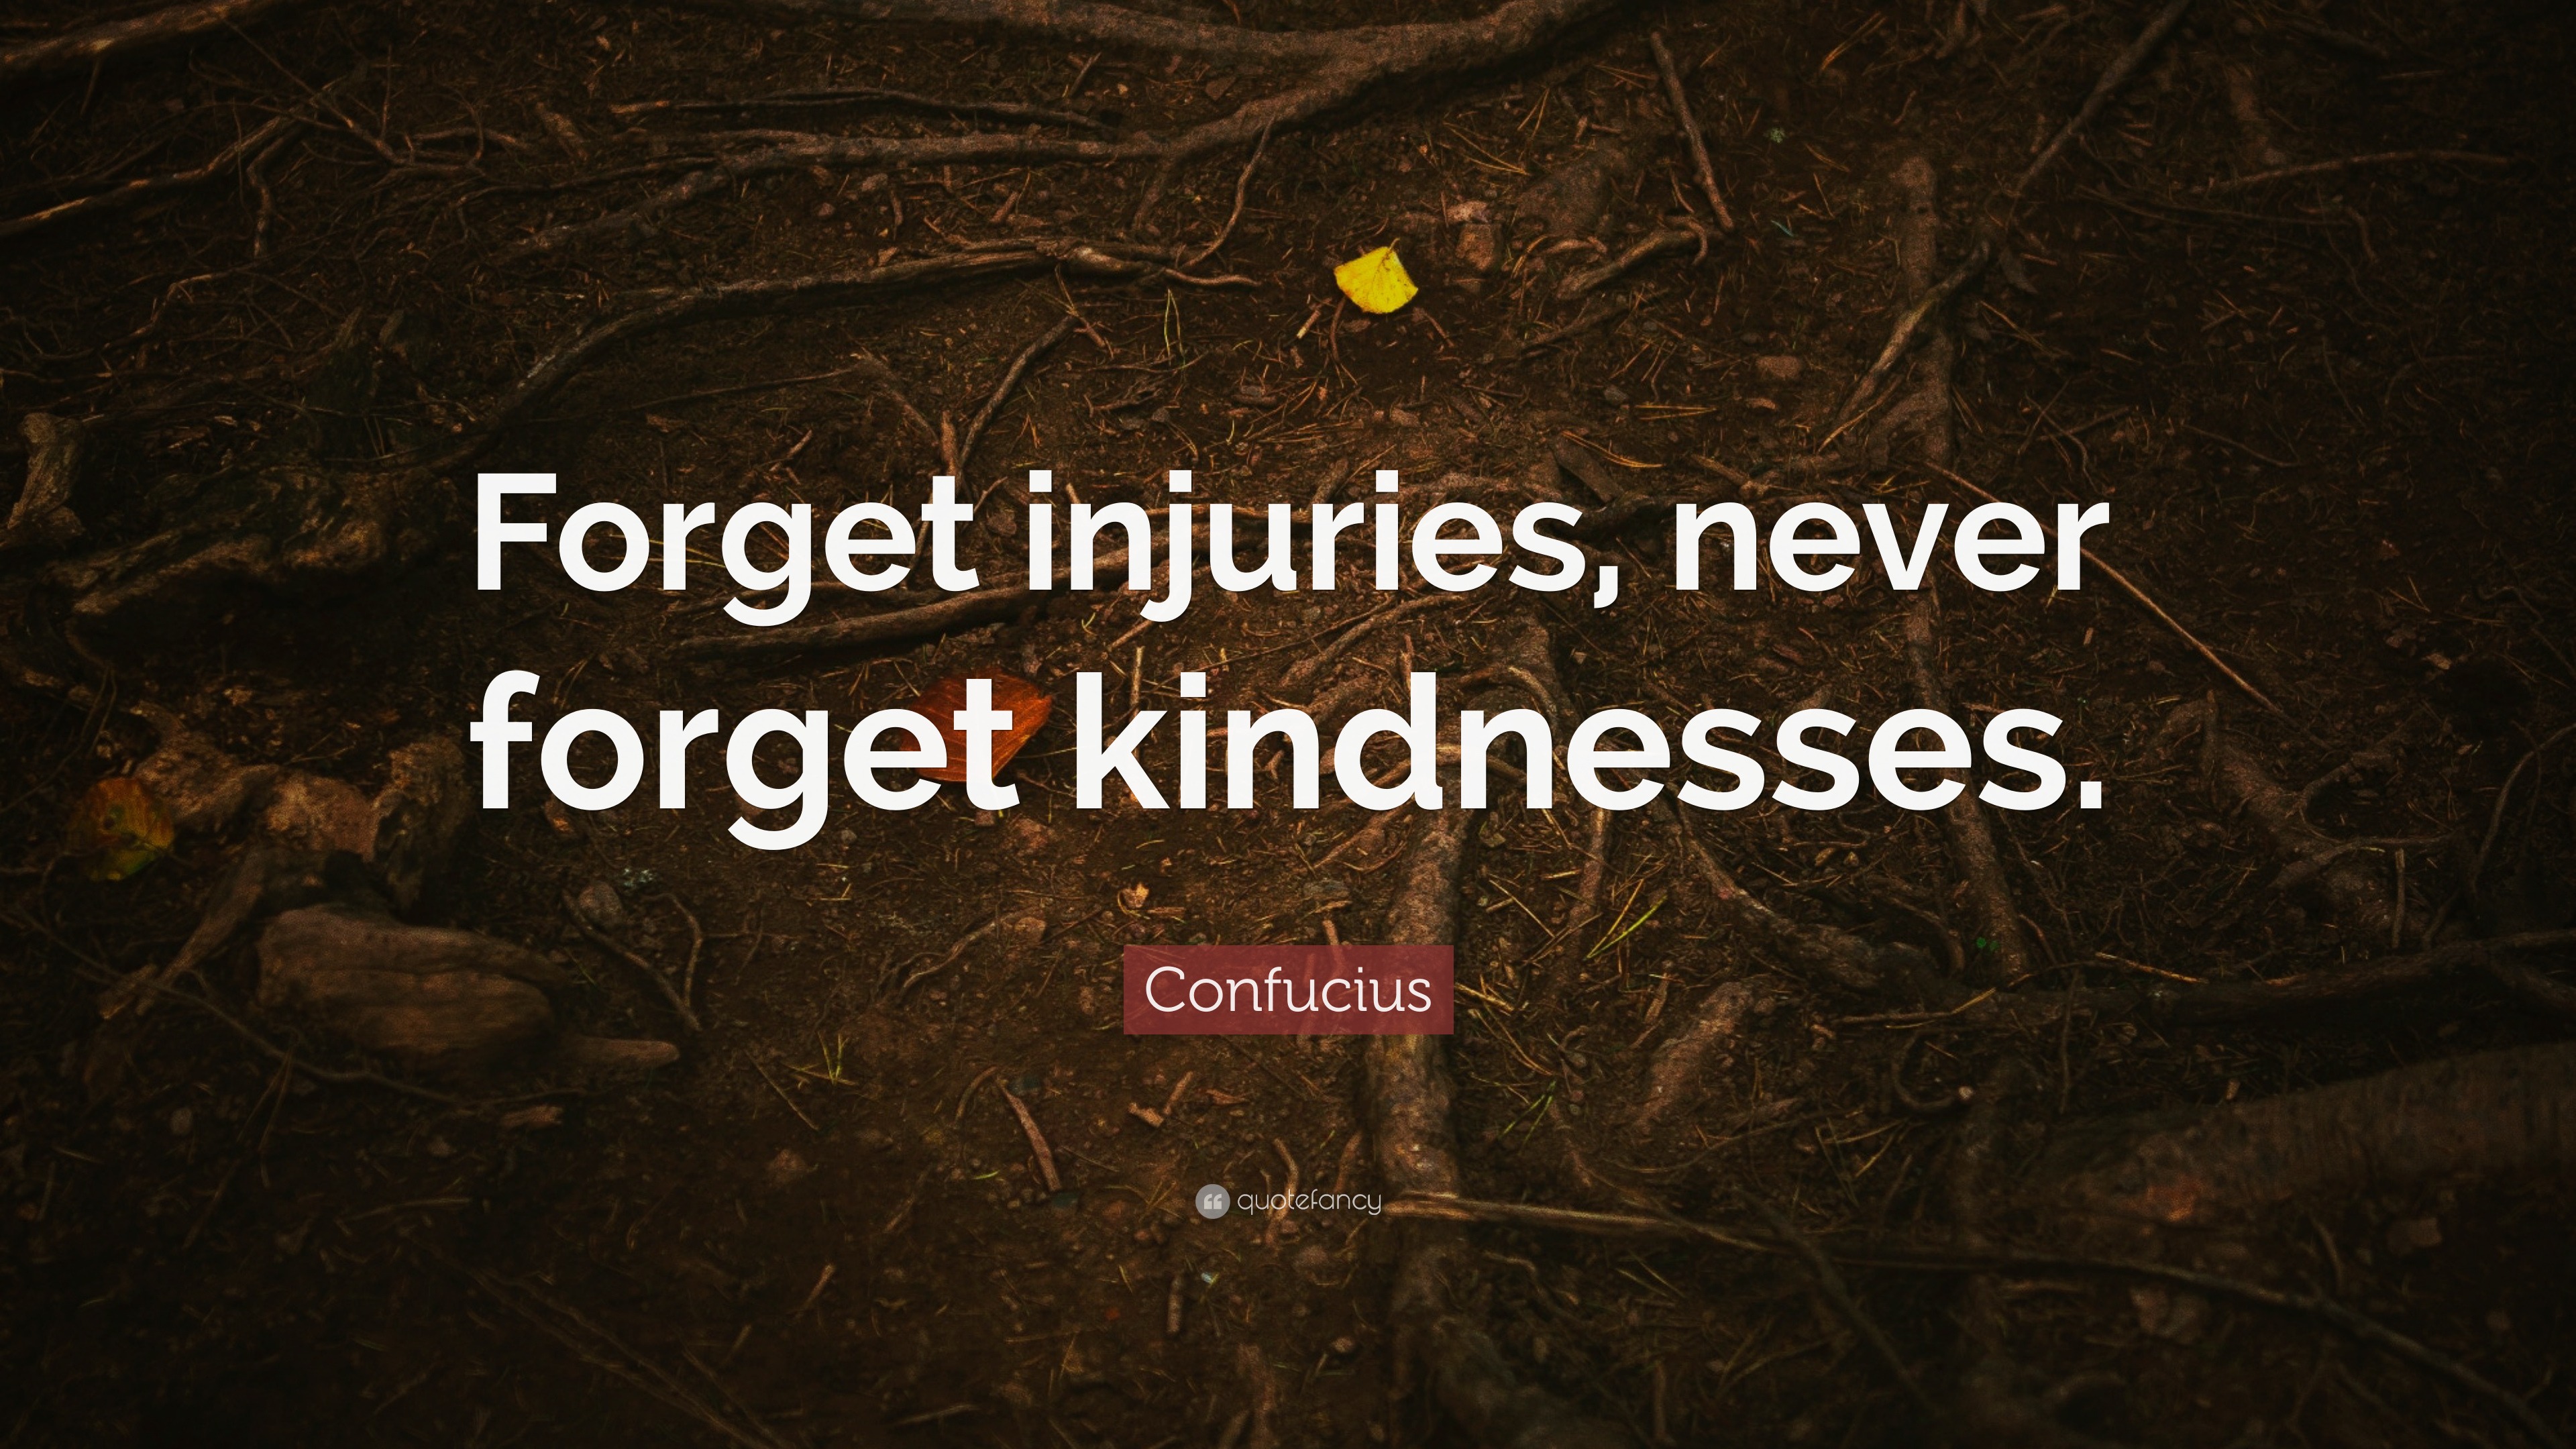 Confucius Quote: “Forget injuries, never forget kindnesses.” (15